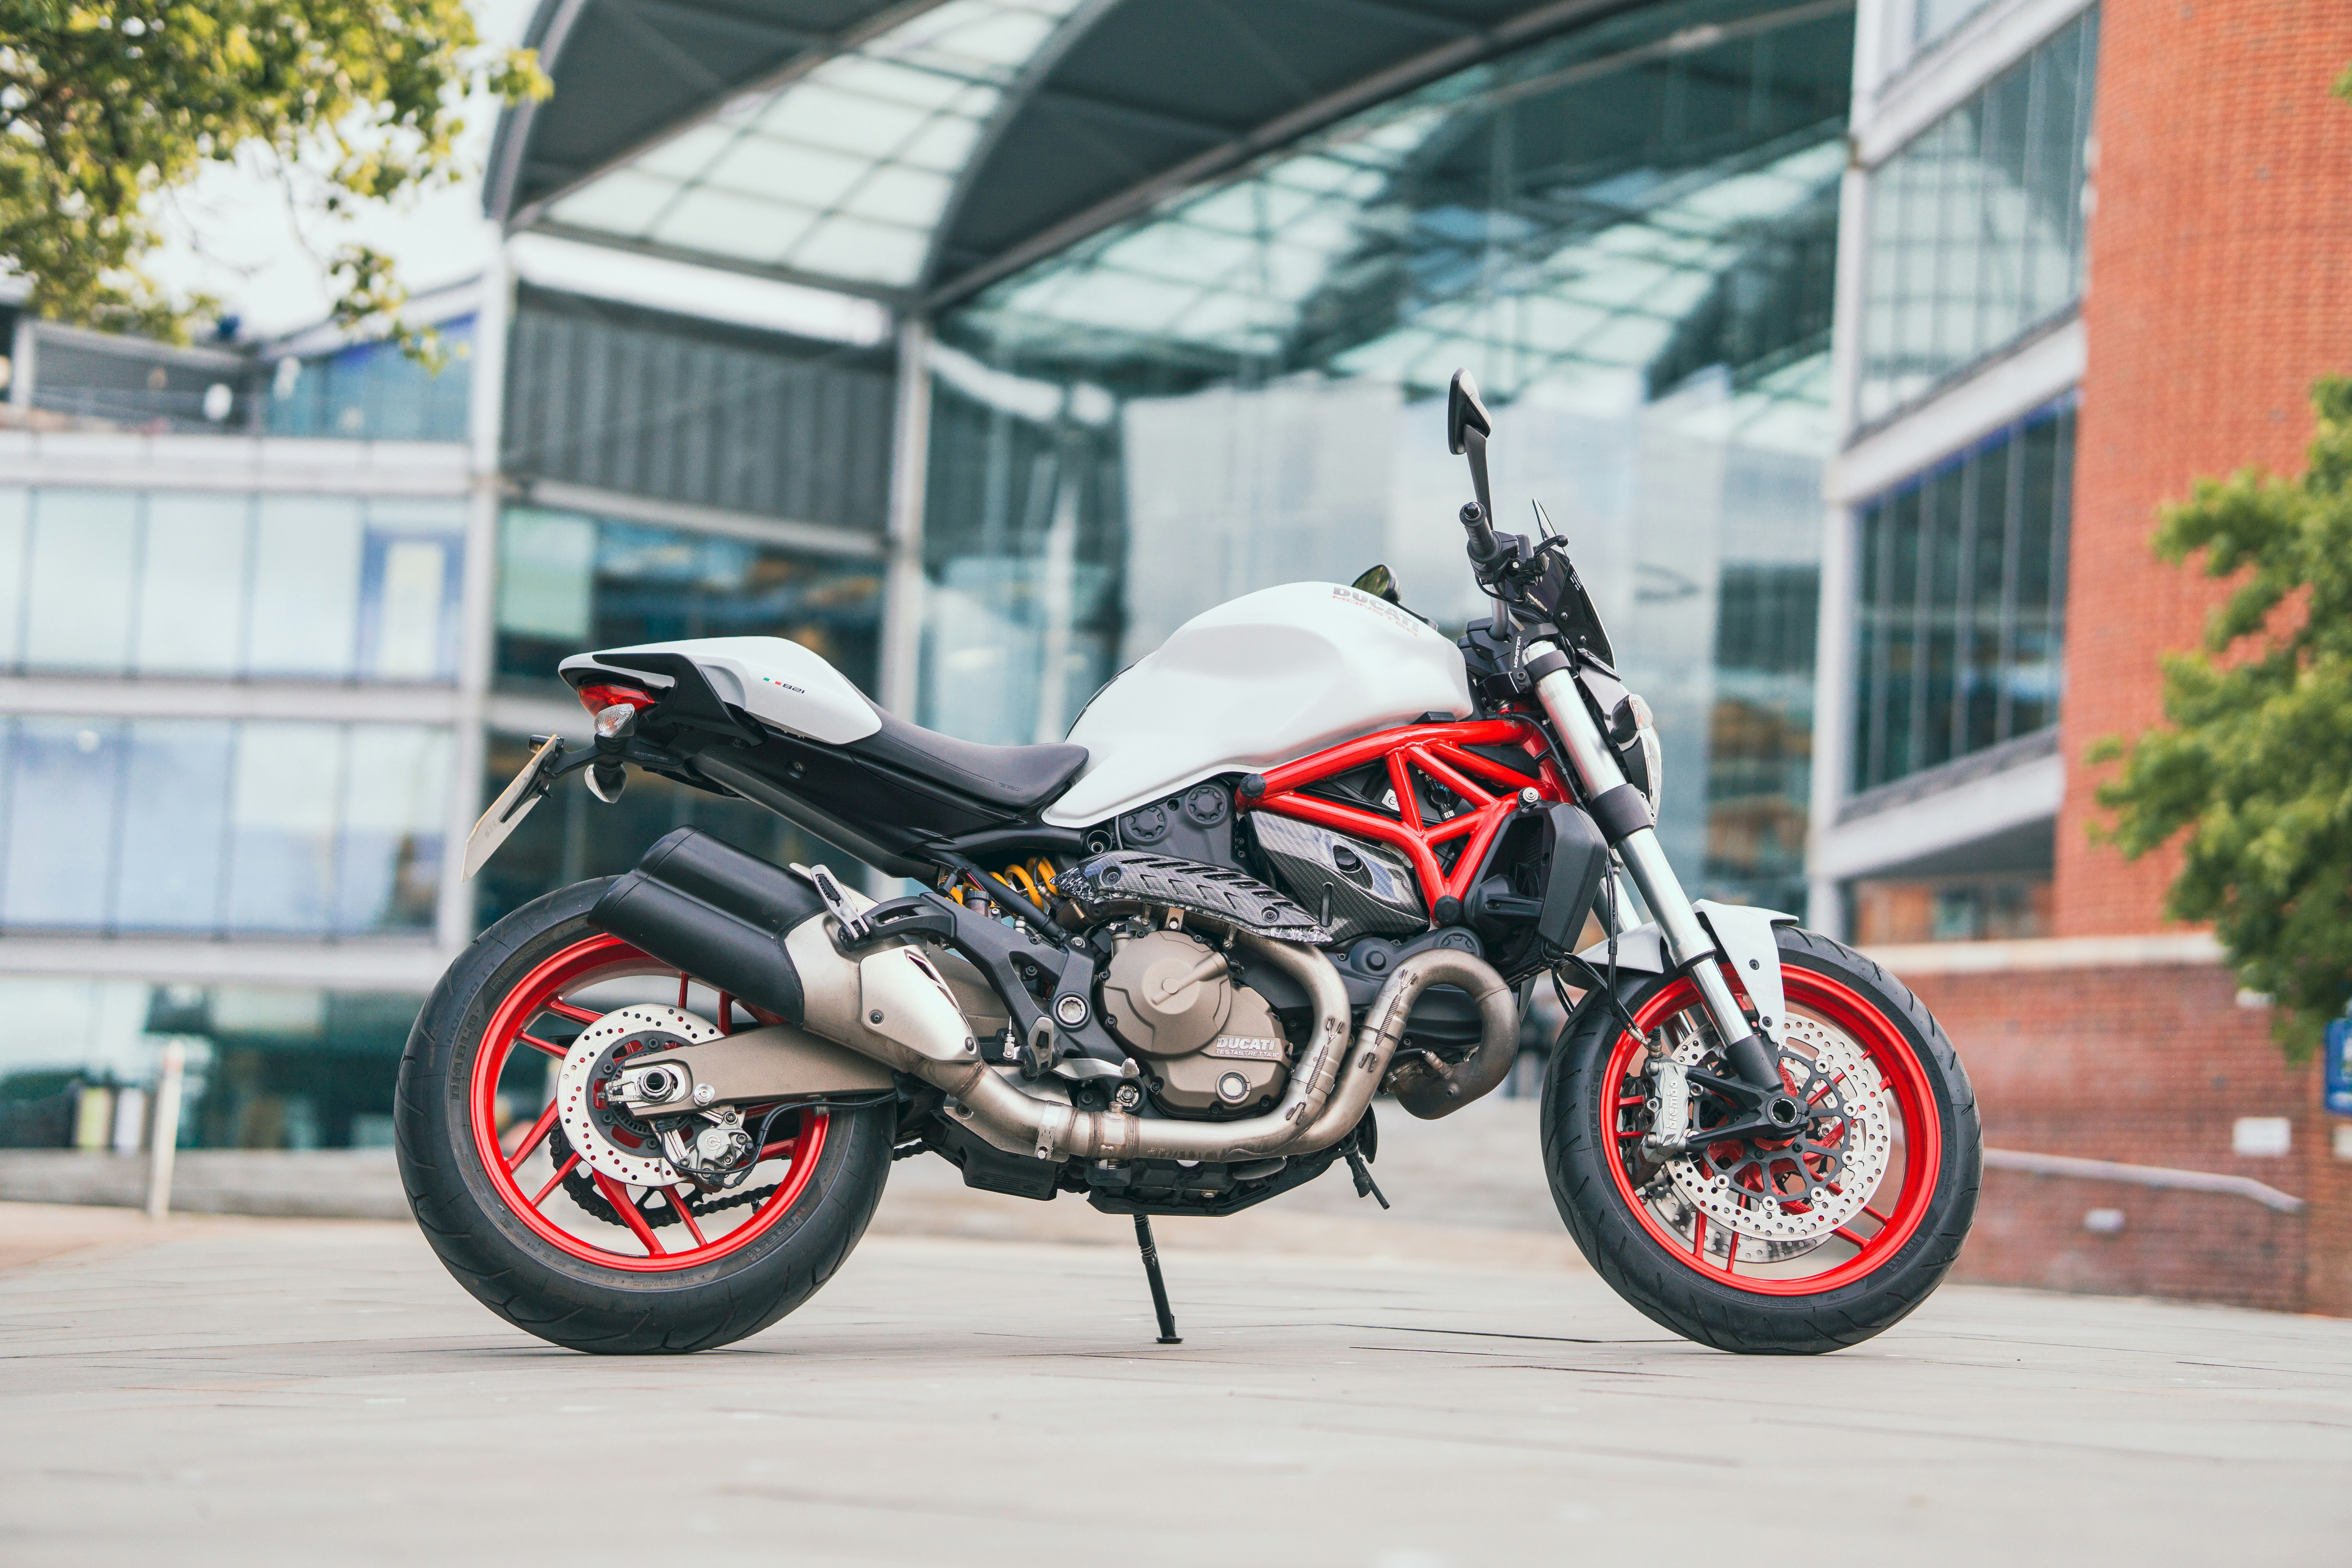 Red and white Ducati Monster 821 motorcycle outside of a large modern library